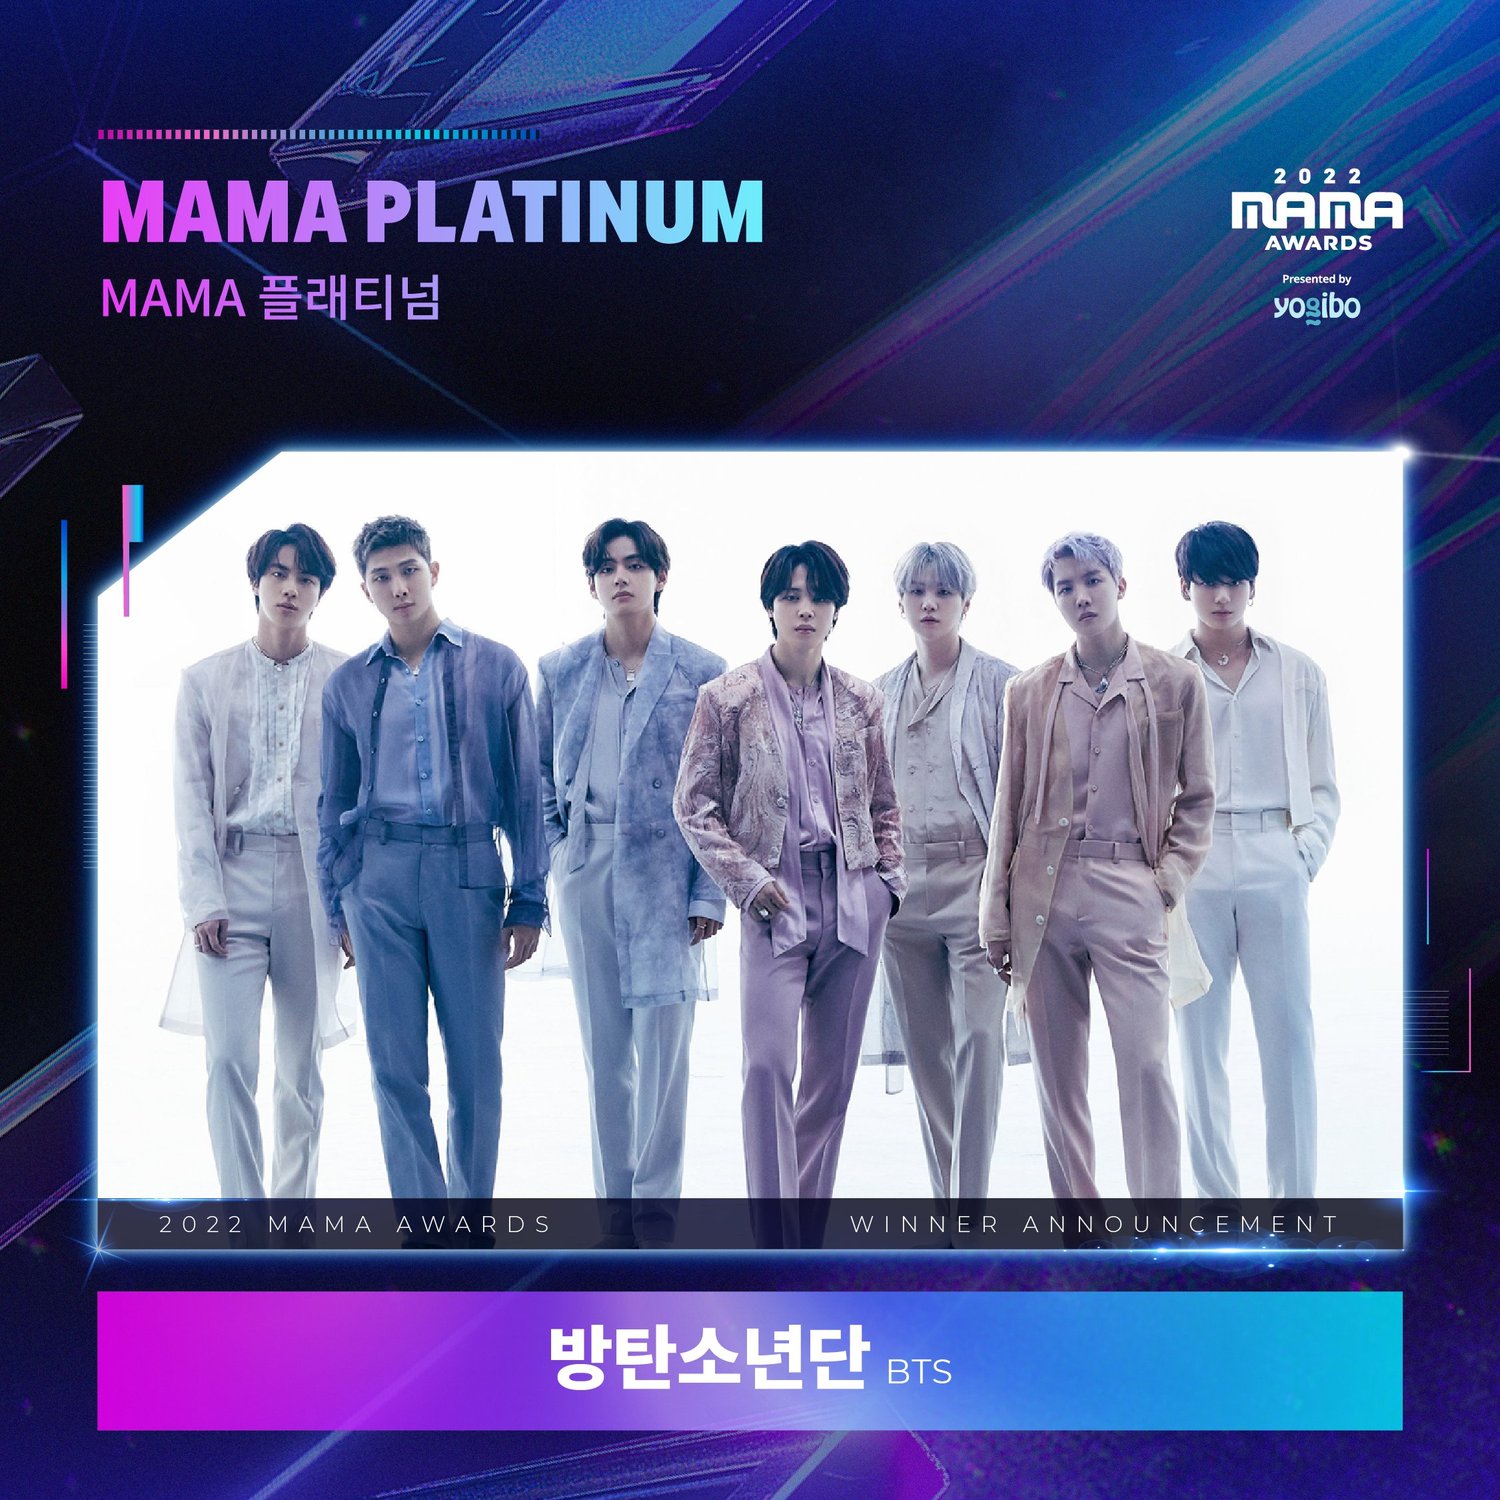 BTS Becomes The First Artist To Receive The MAMA Platinum Award — US BTS  ARMY